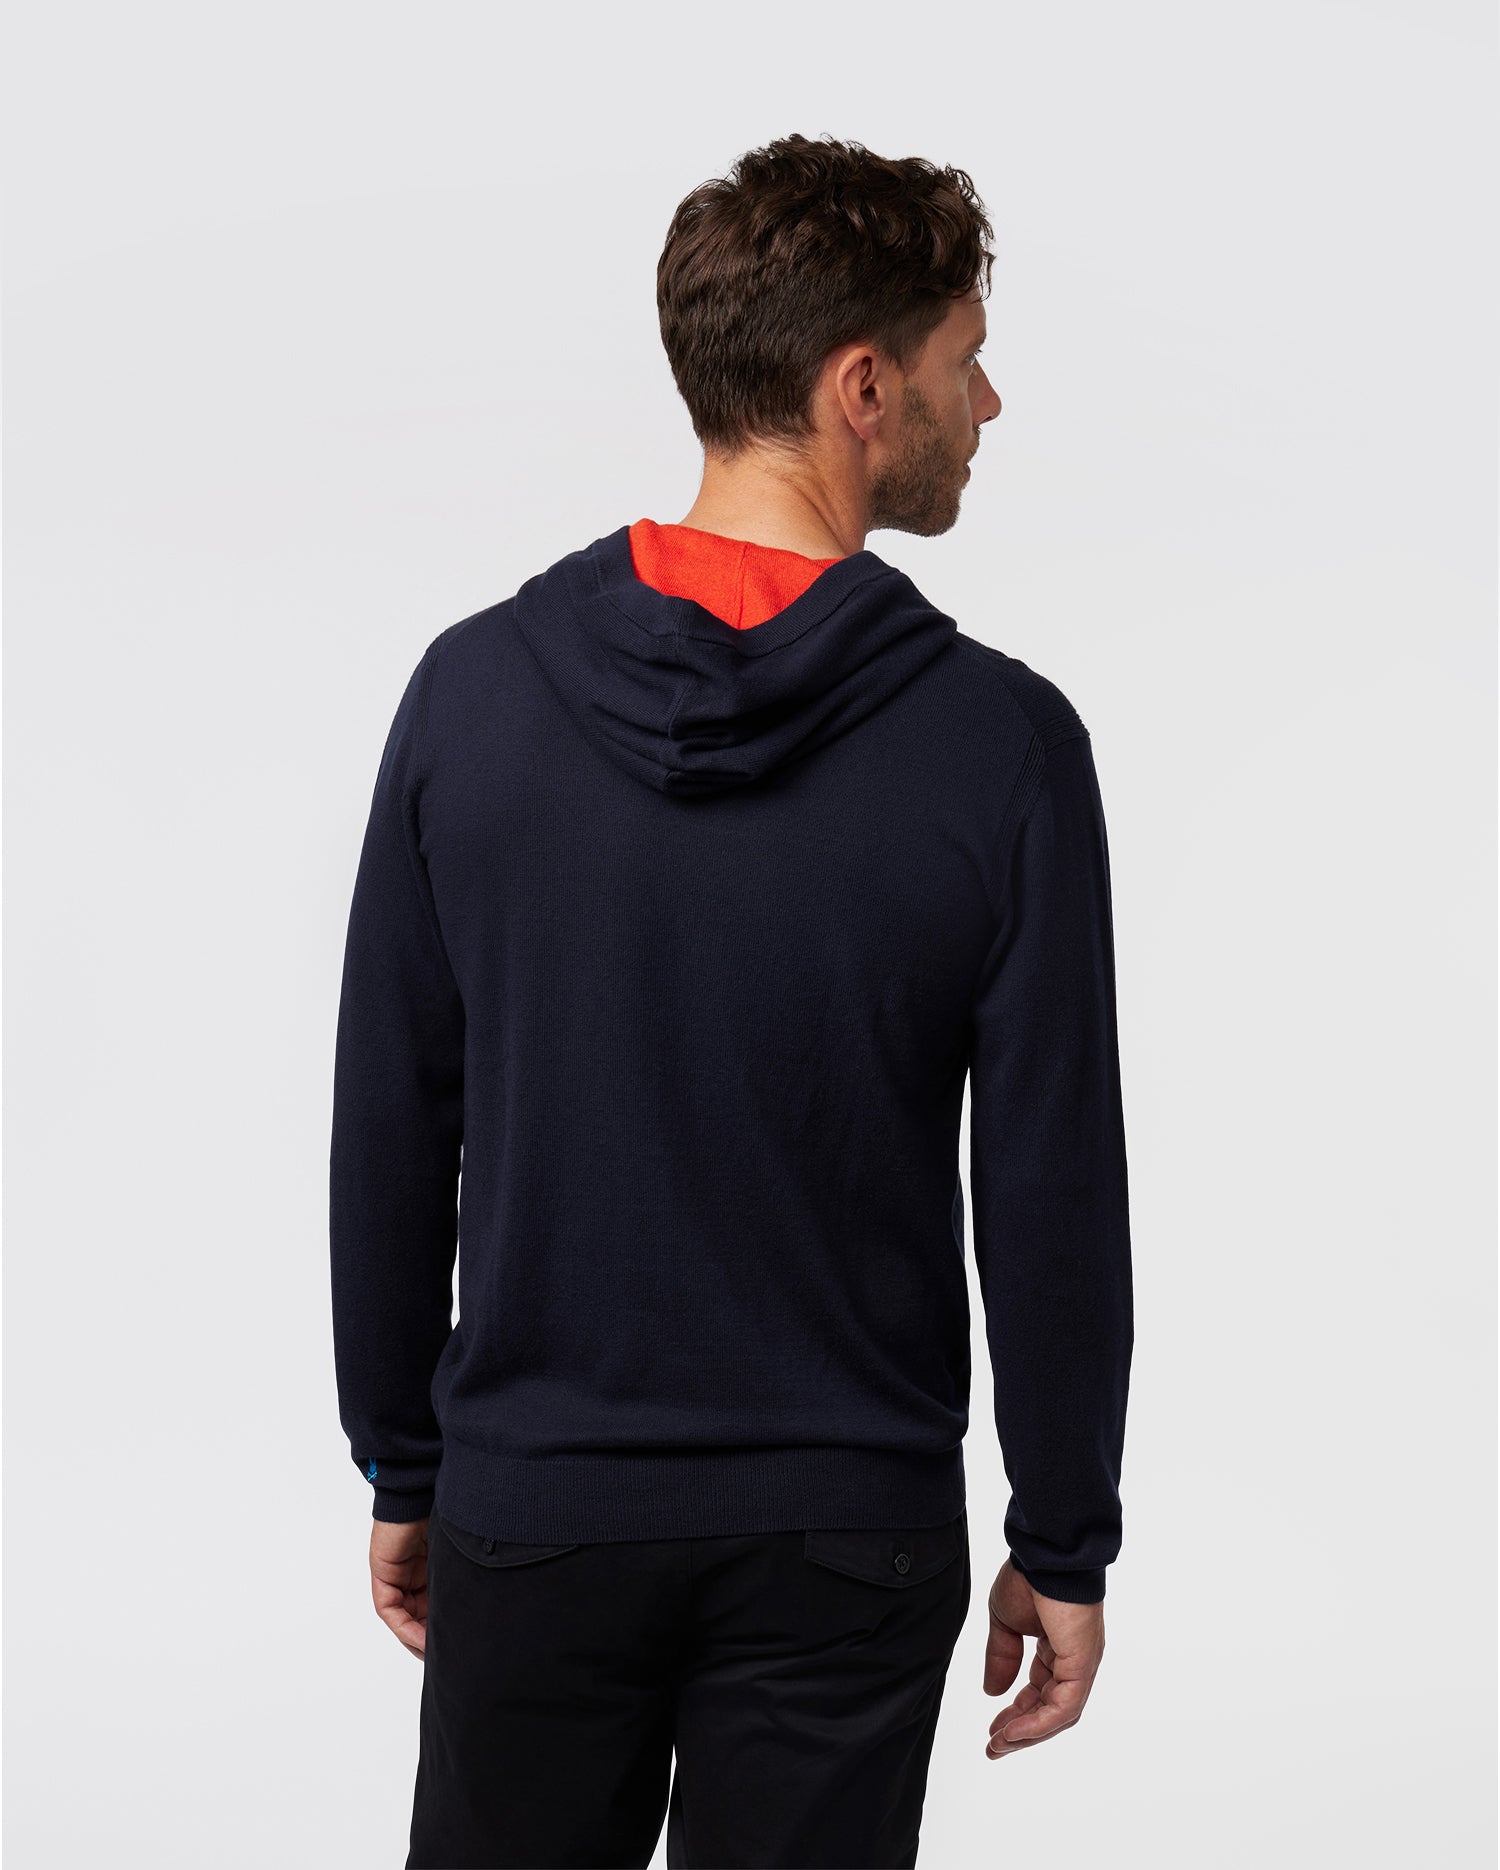 MENS NAVY CHESTER HOODED SWEATER | PSYCHO BUNNY